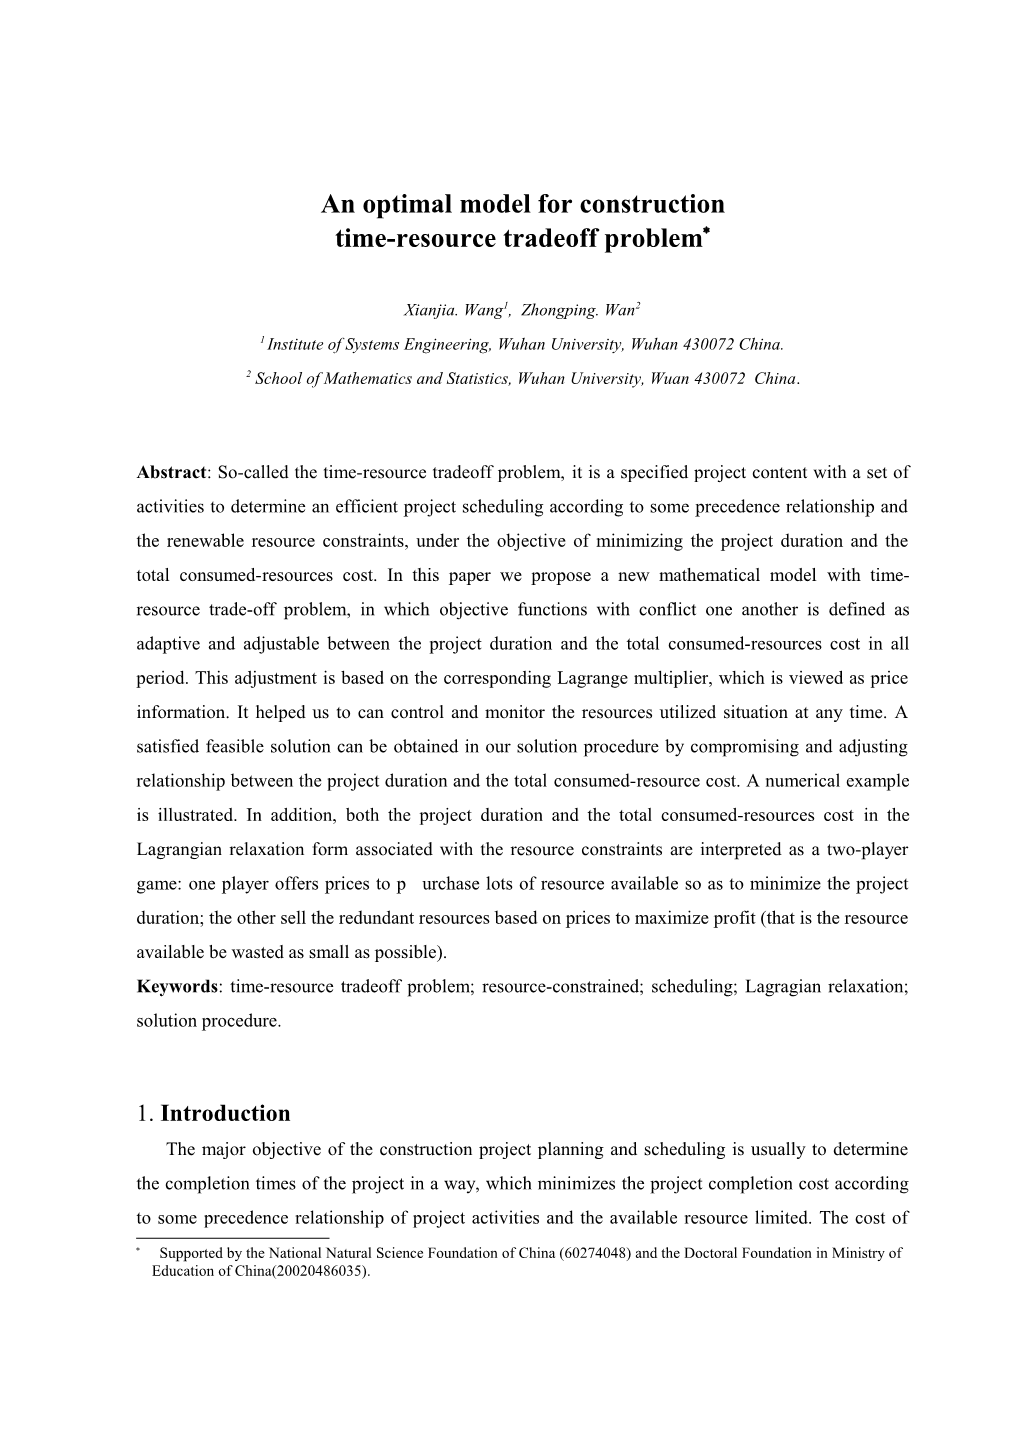 An Optimal Model for Construction Time-Resource Trade-Off